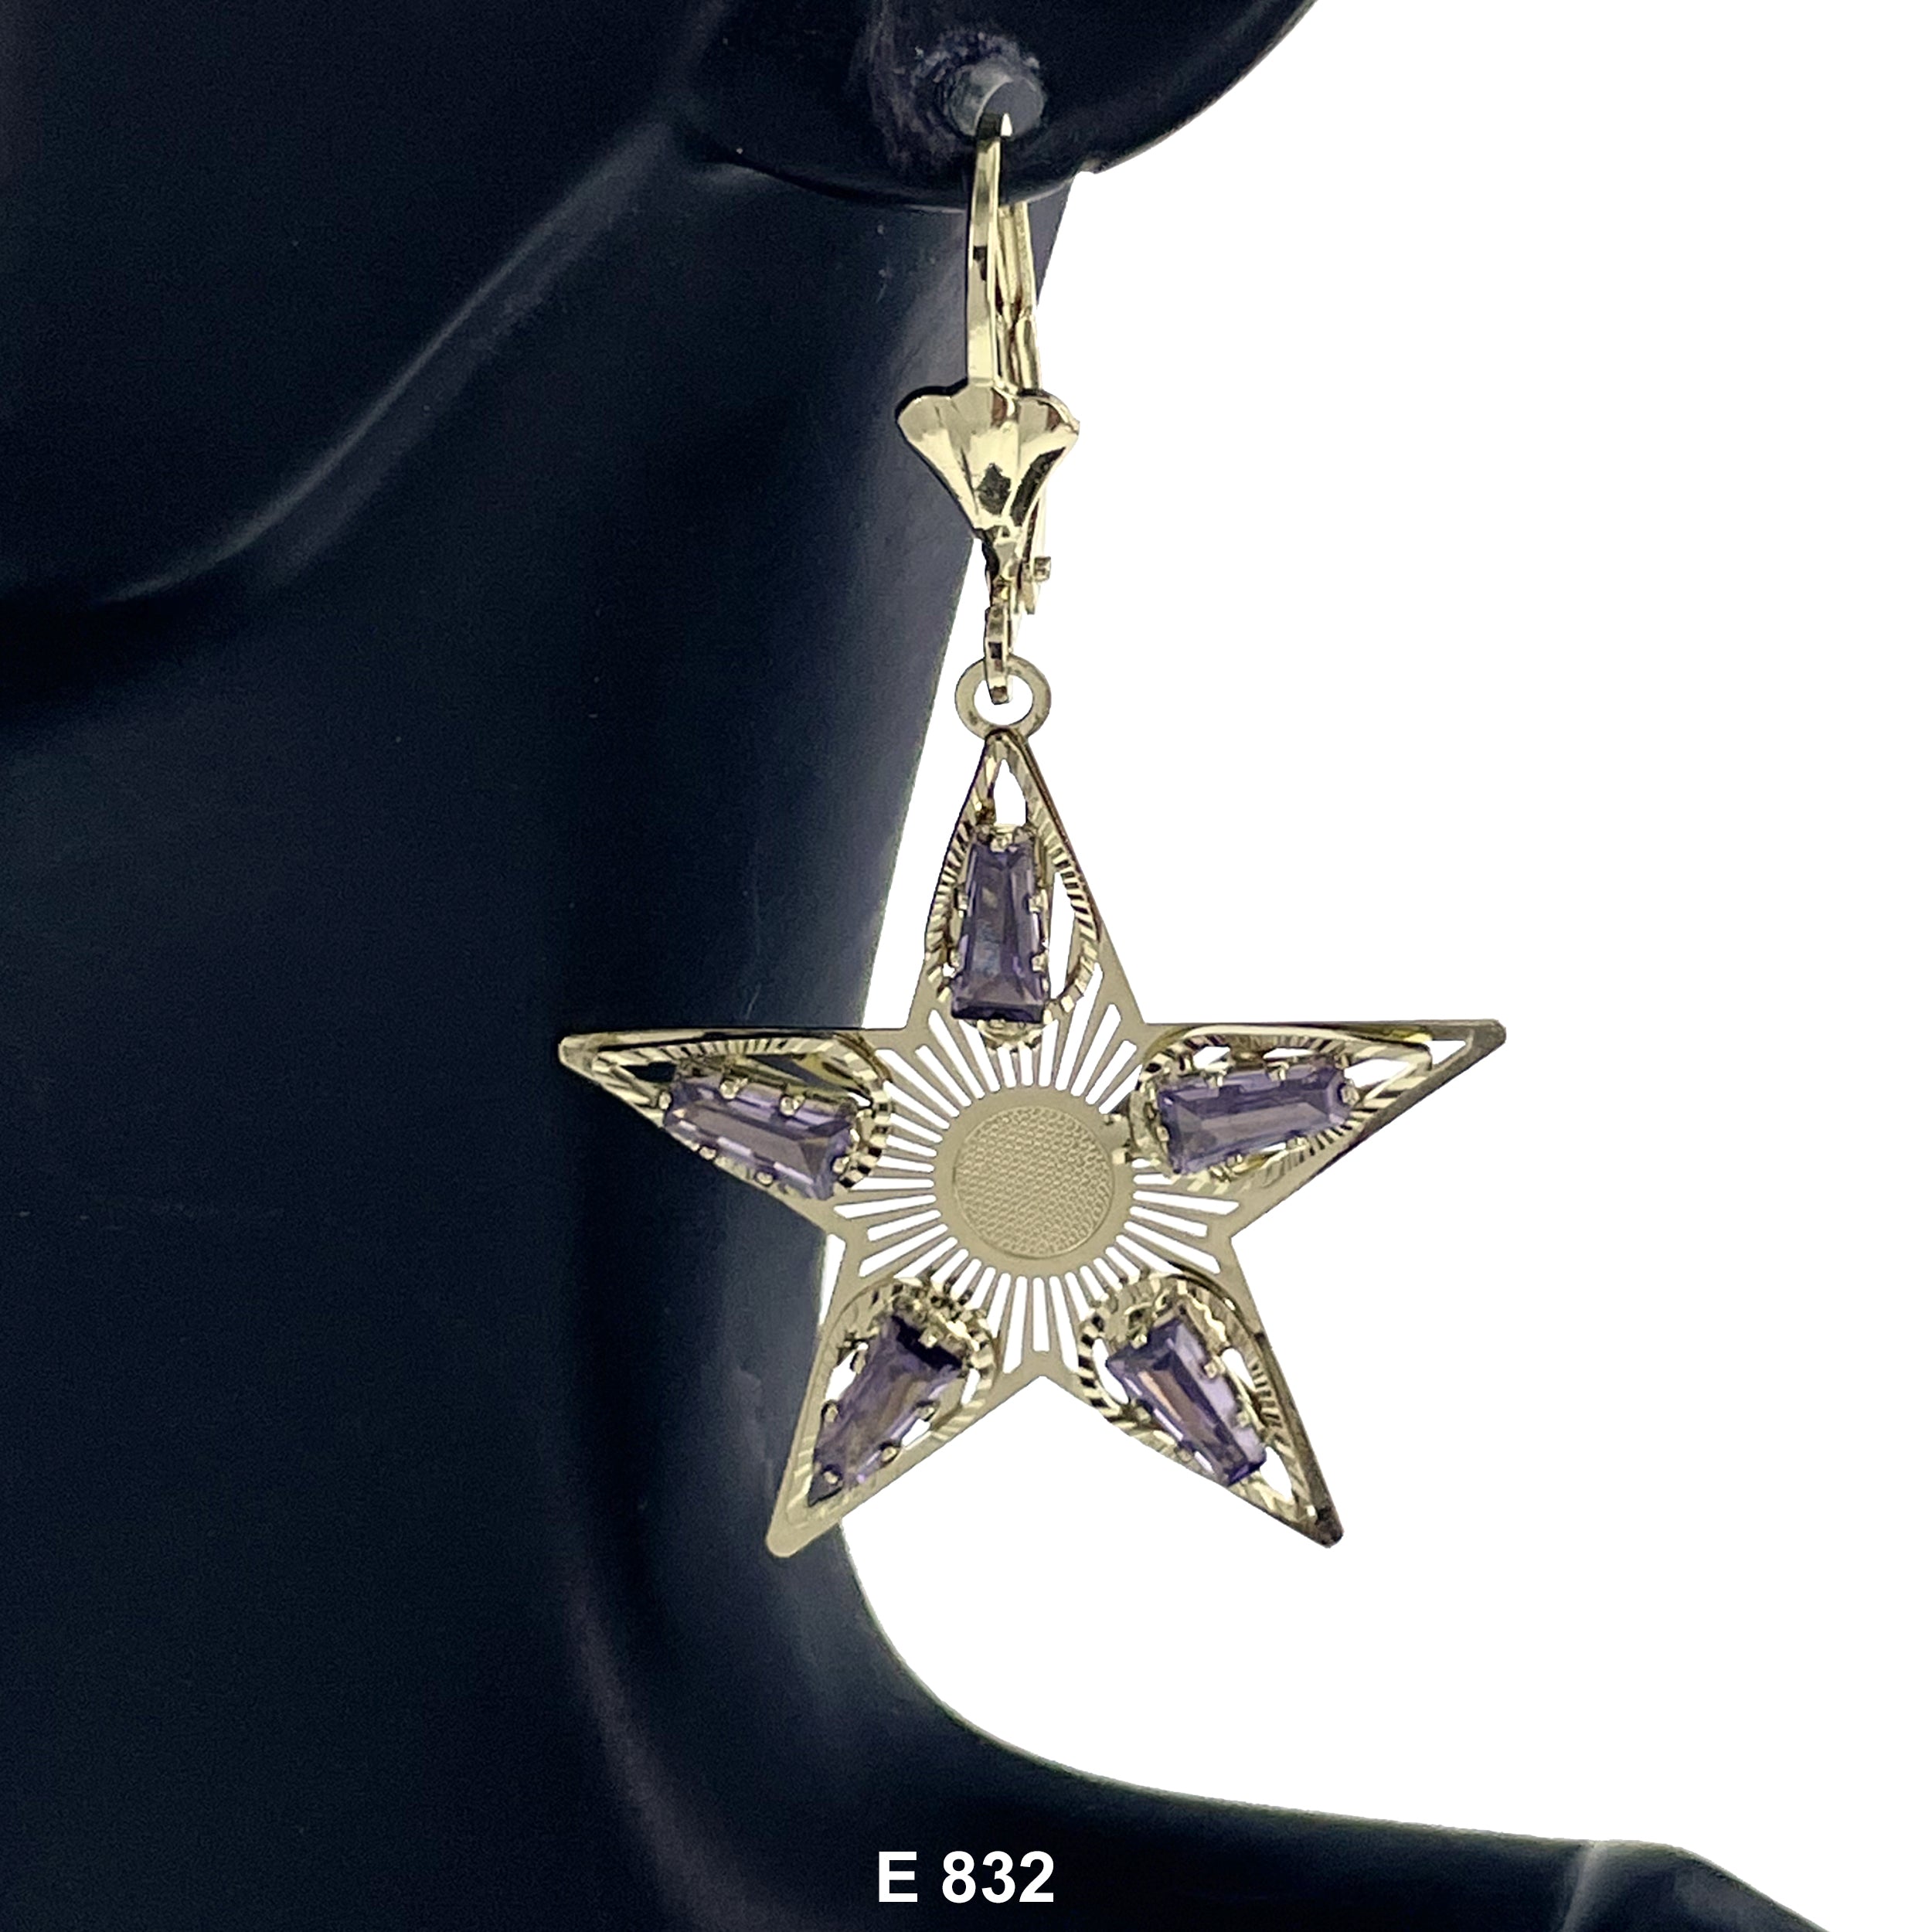 Duck Paw Big Star Stoned Earring E 832